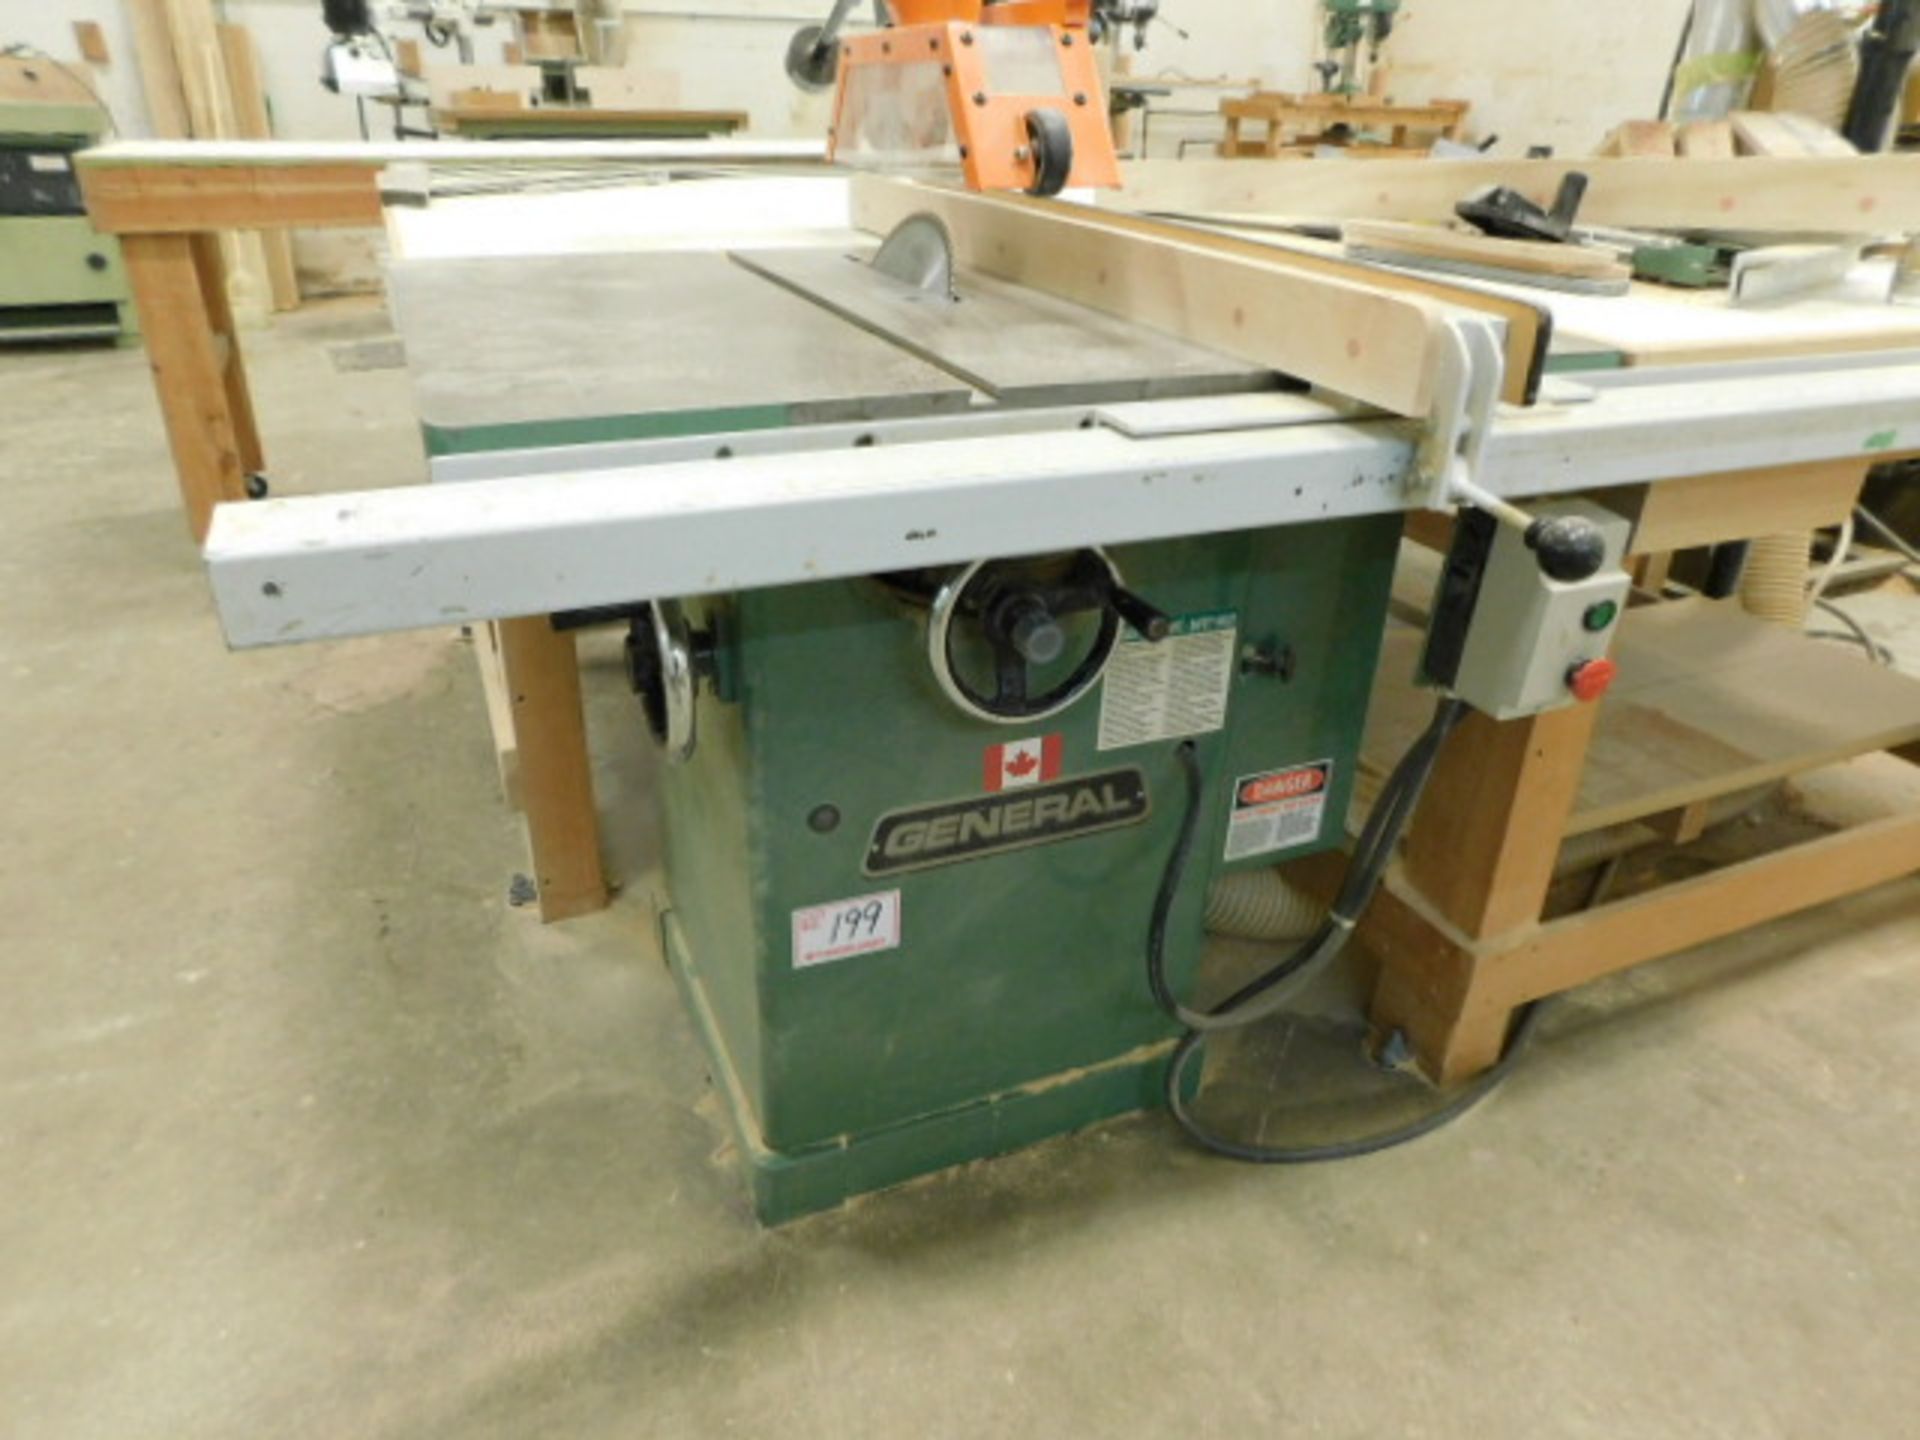 GENERAL TABLE SAW 208/230V, 3PH, W/ FENCE